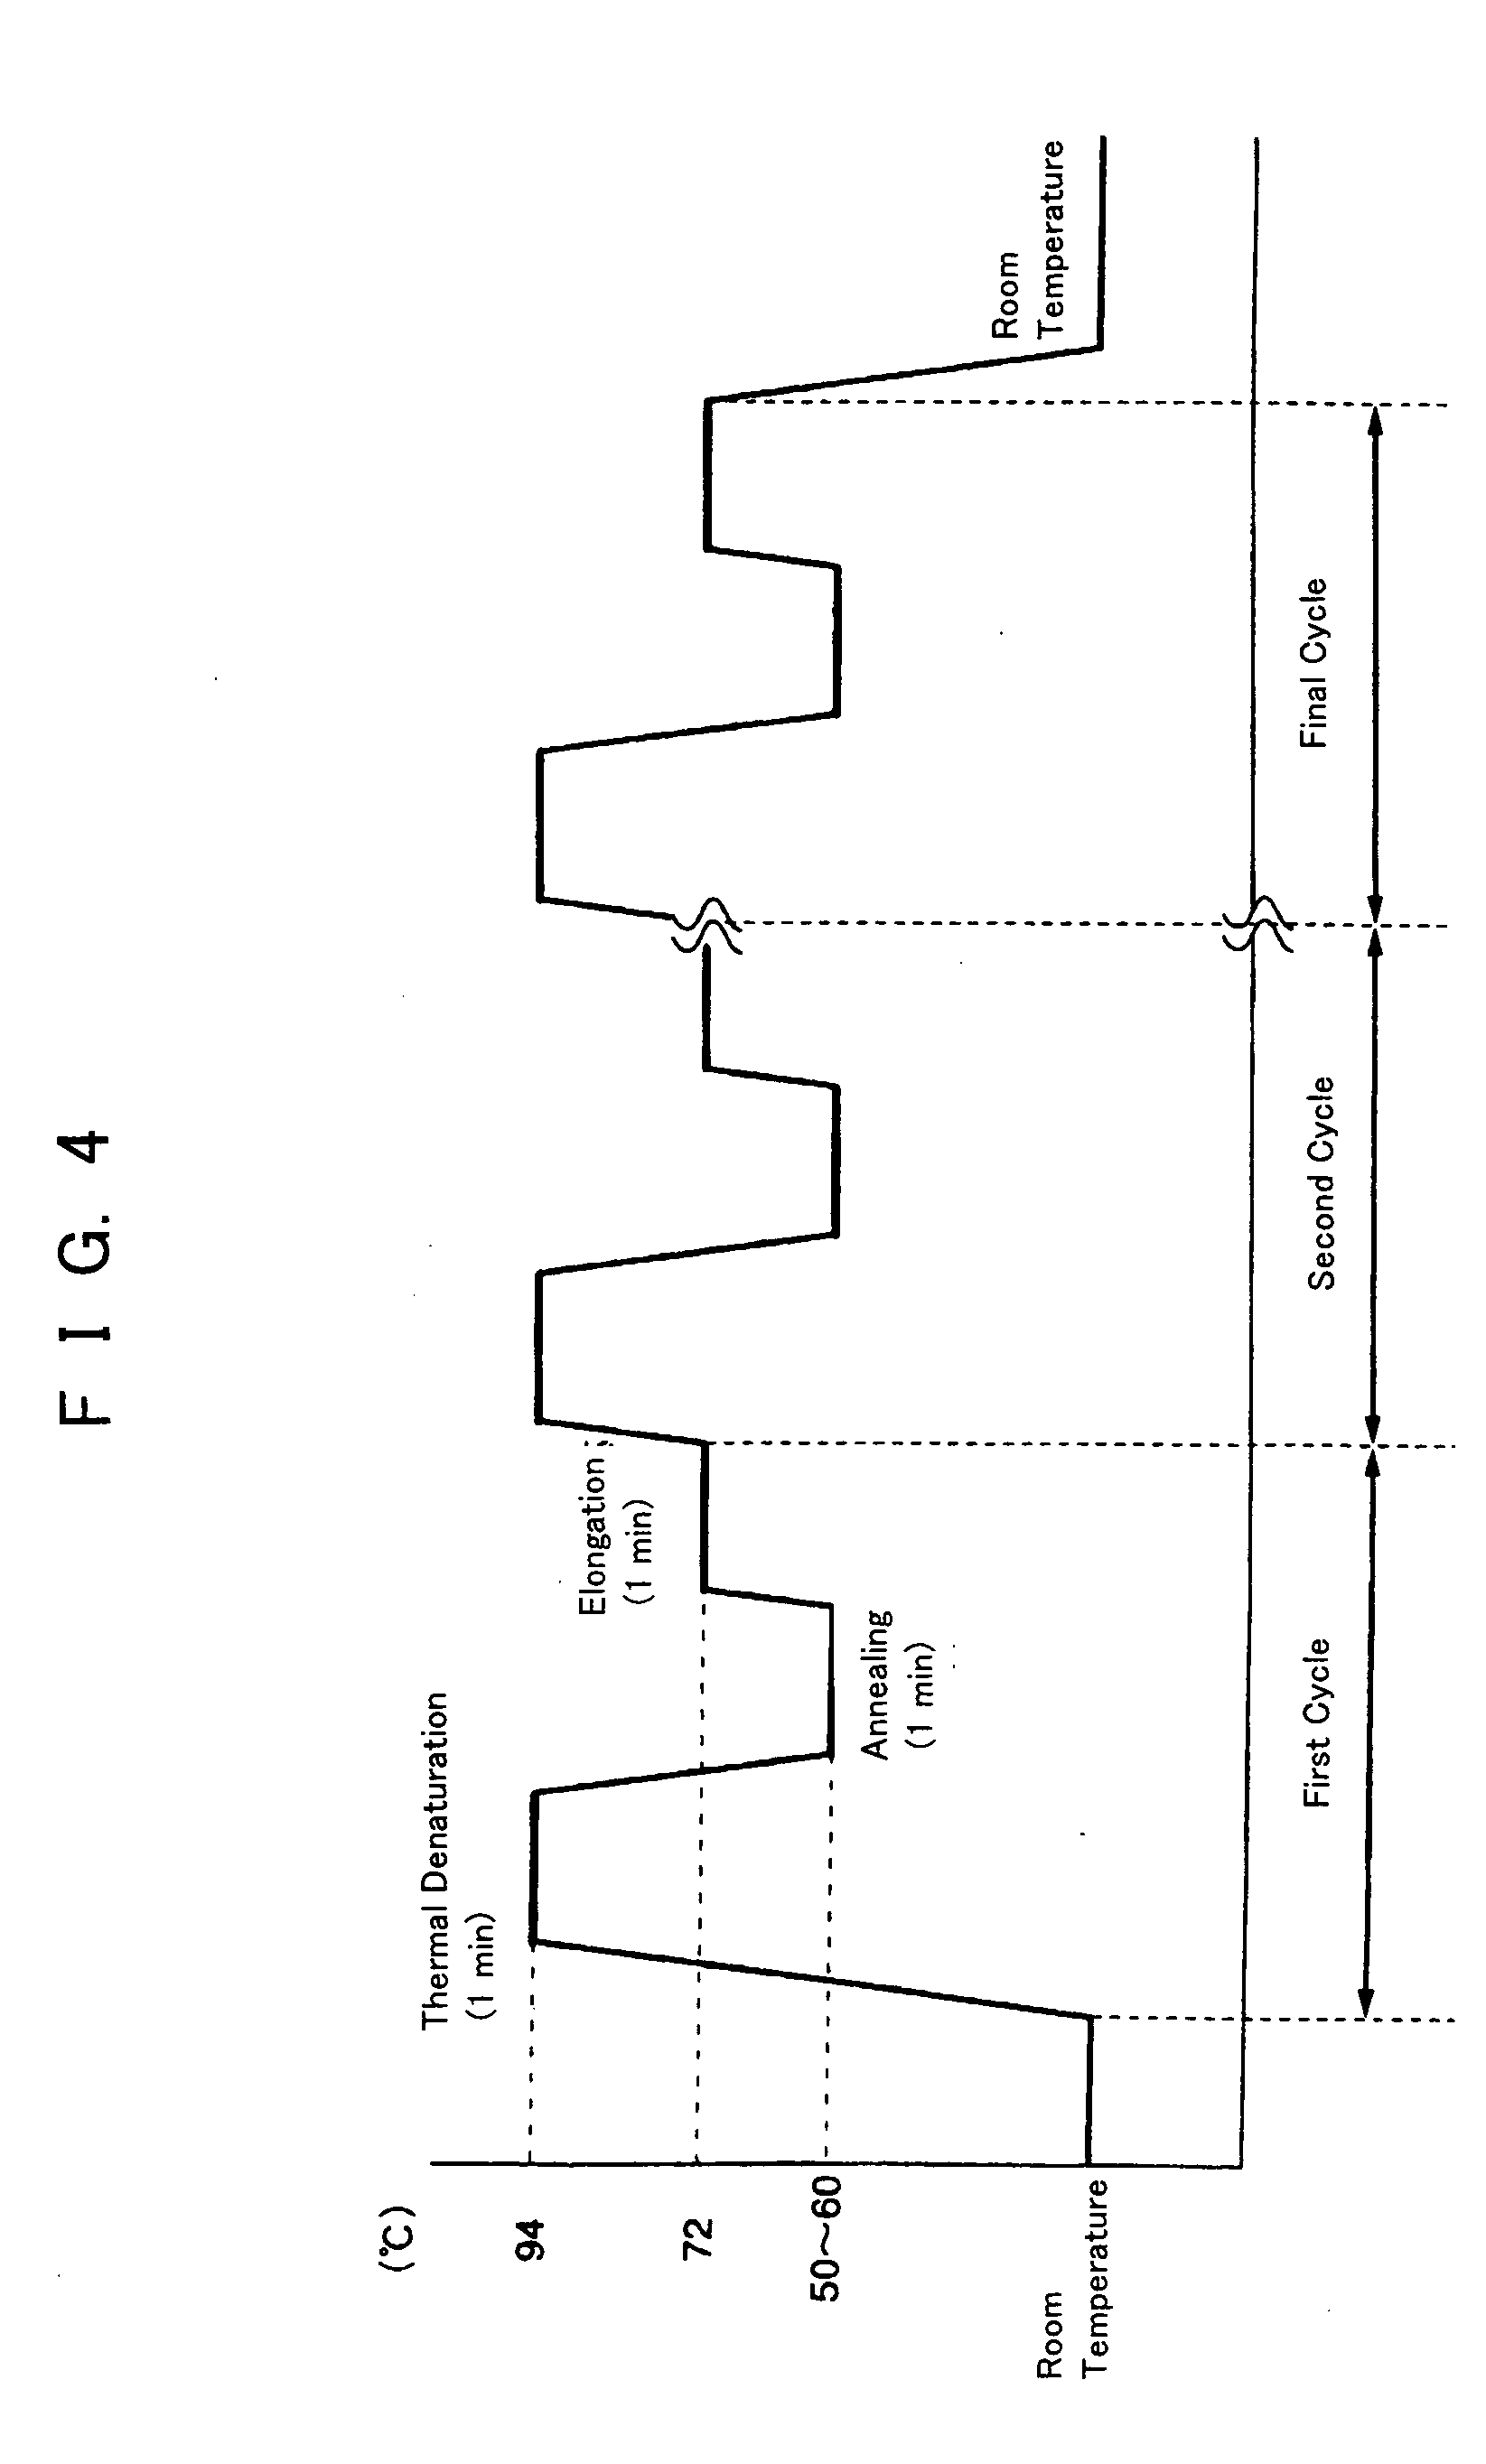 Pcr method by electrostatic transportation, hybridization method for electrostatic transportation and devices therefor